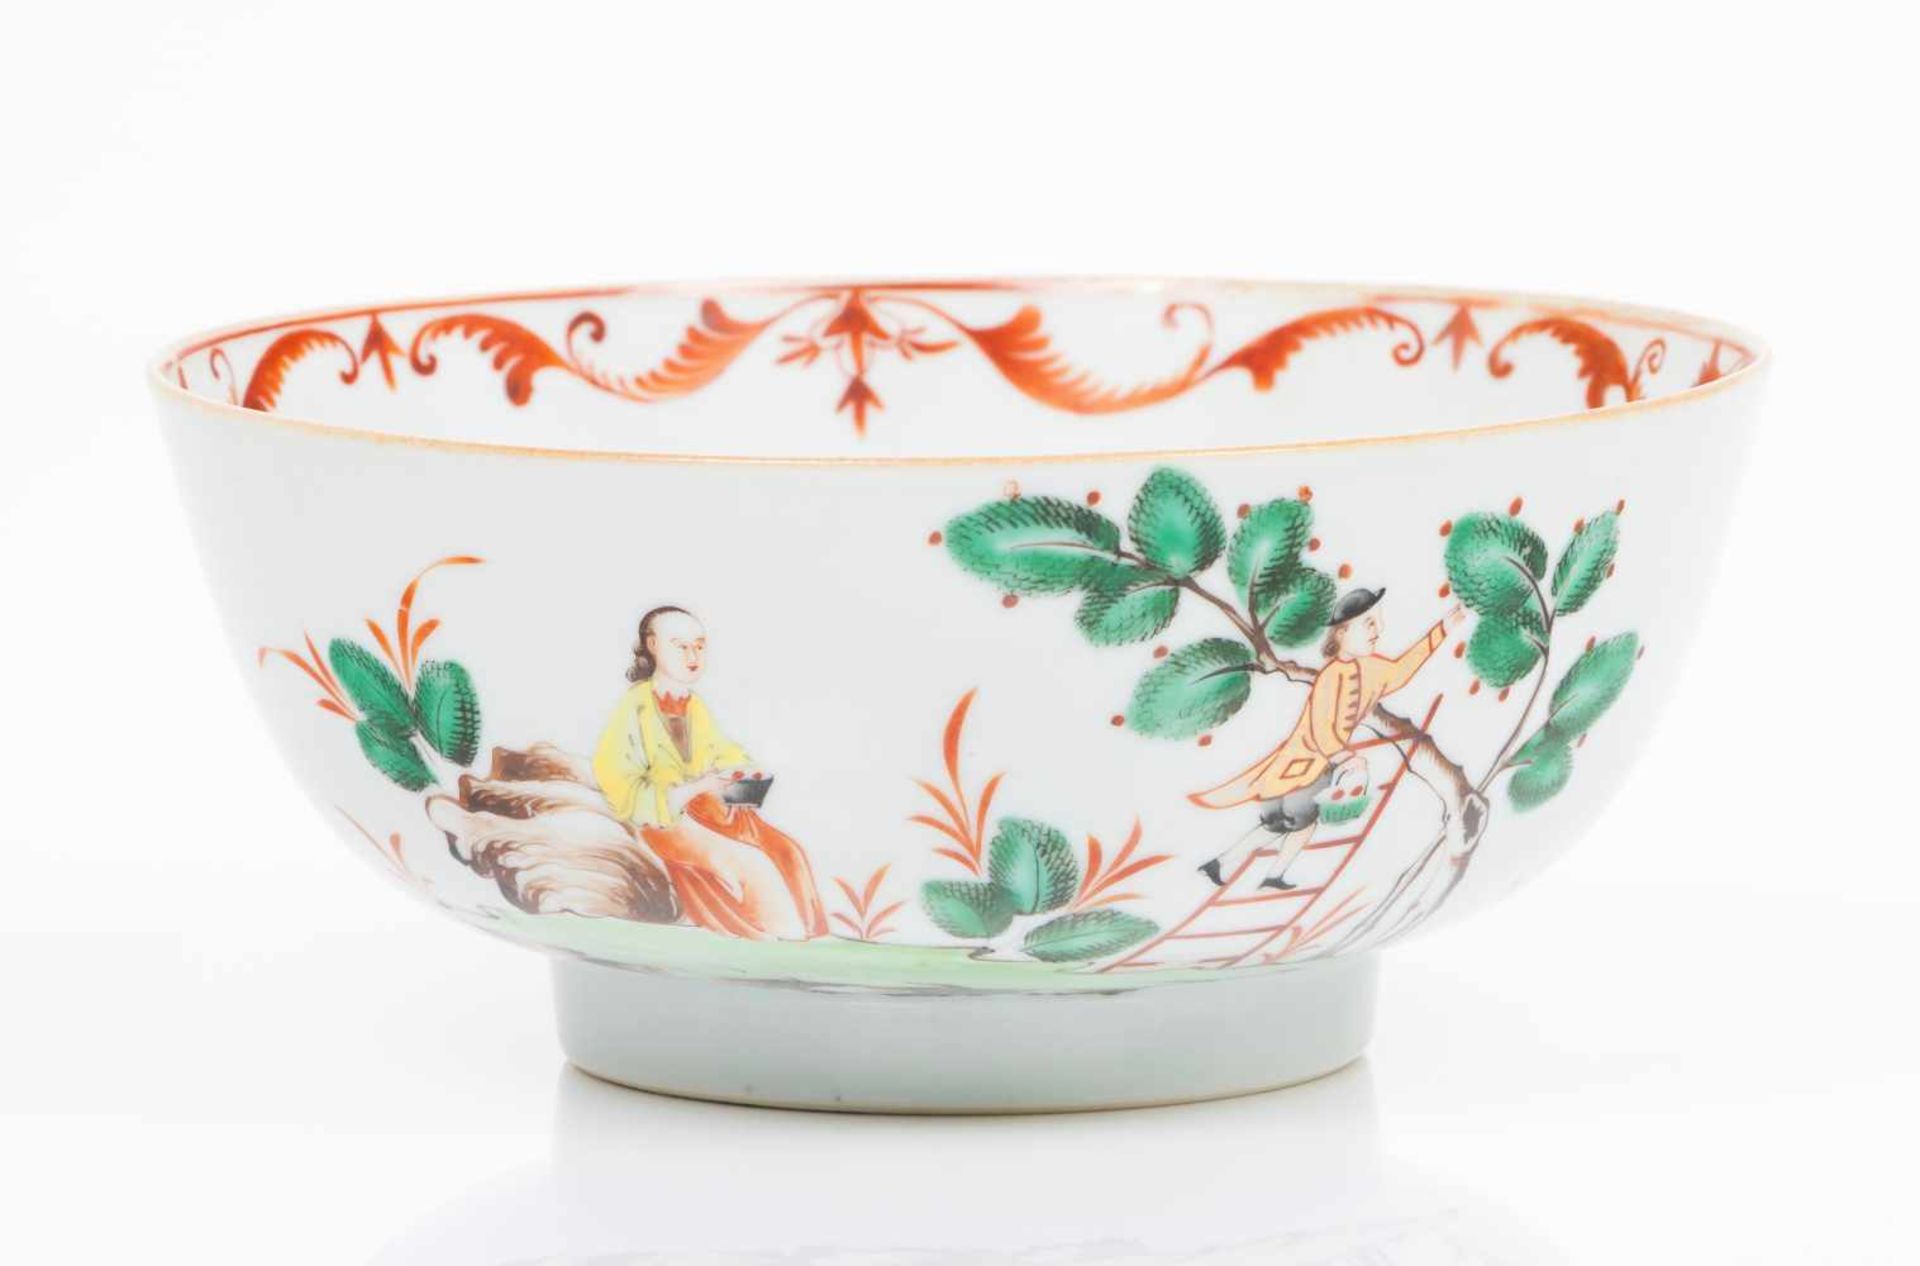 A bowlChinese export porcelainPolychrome "Famille Rose" enamels and iron oxide decoration